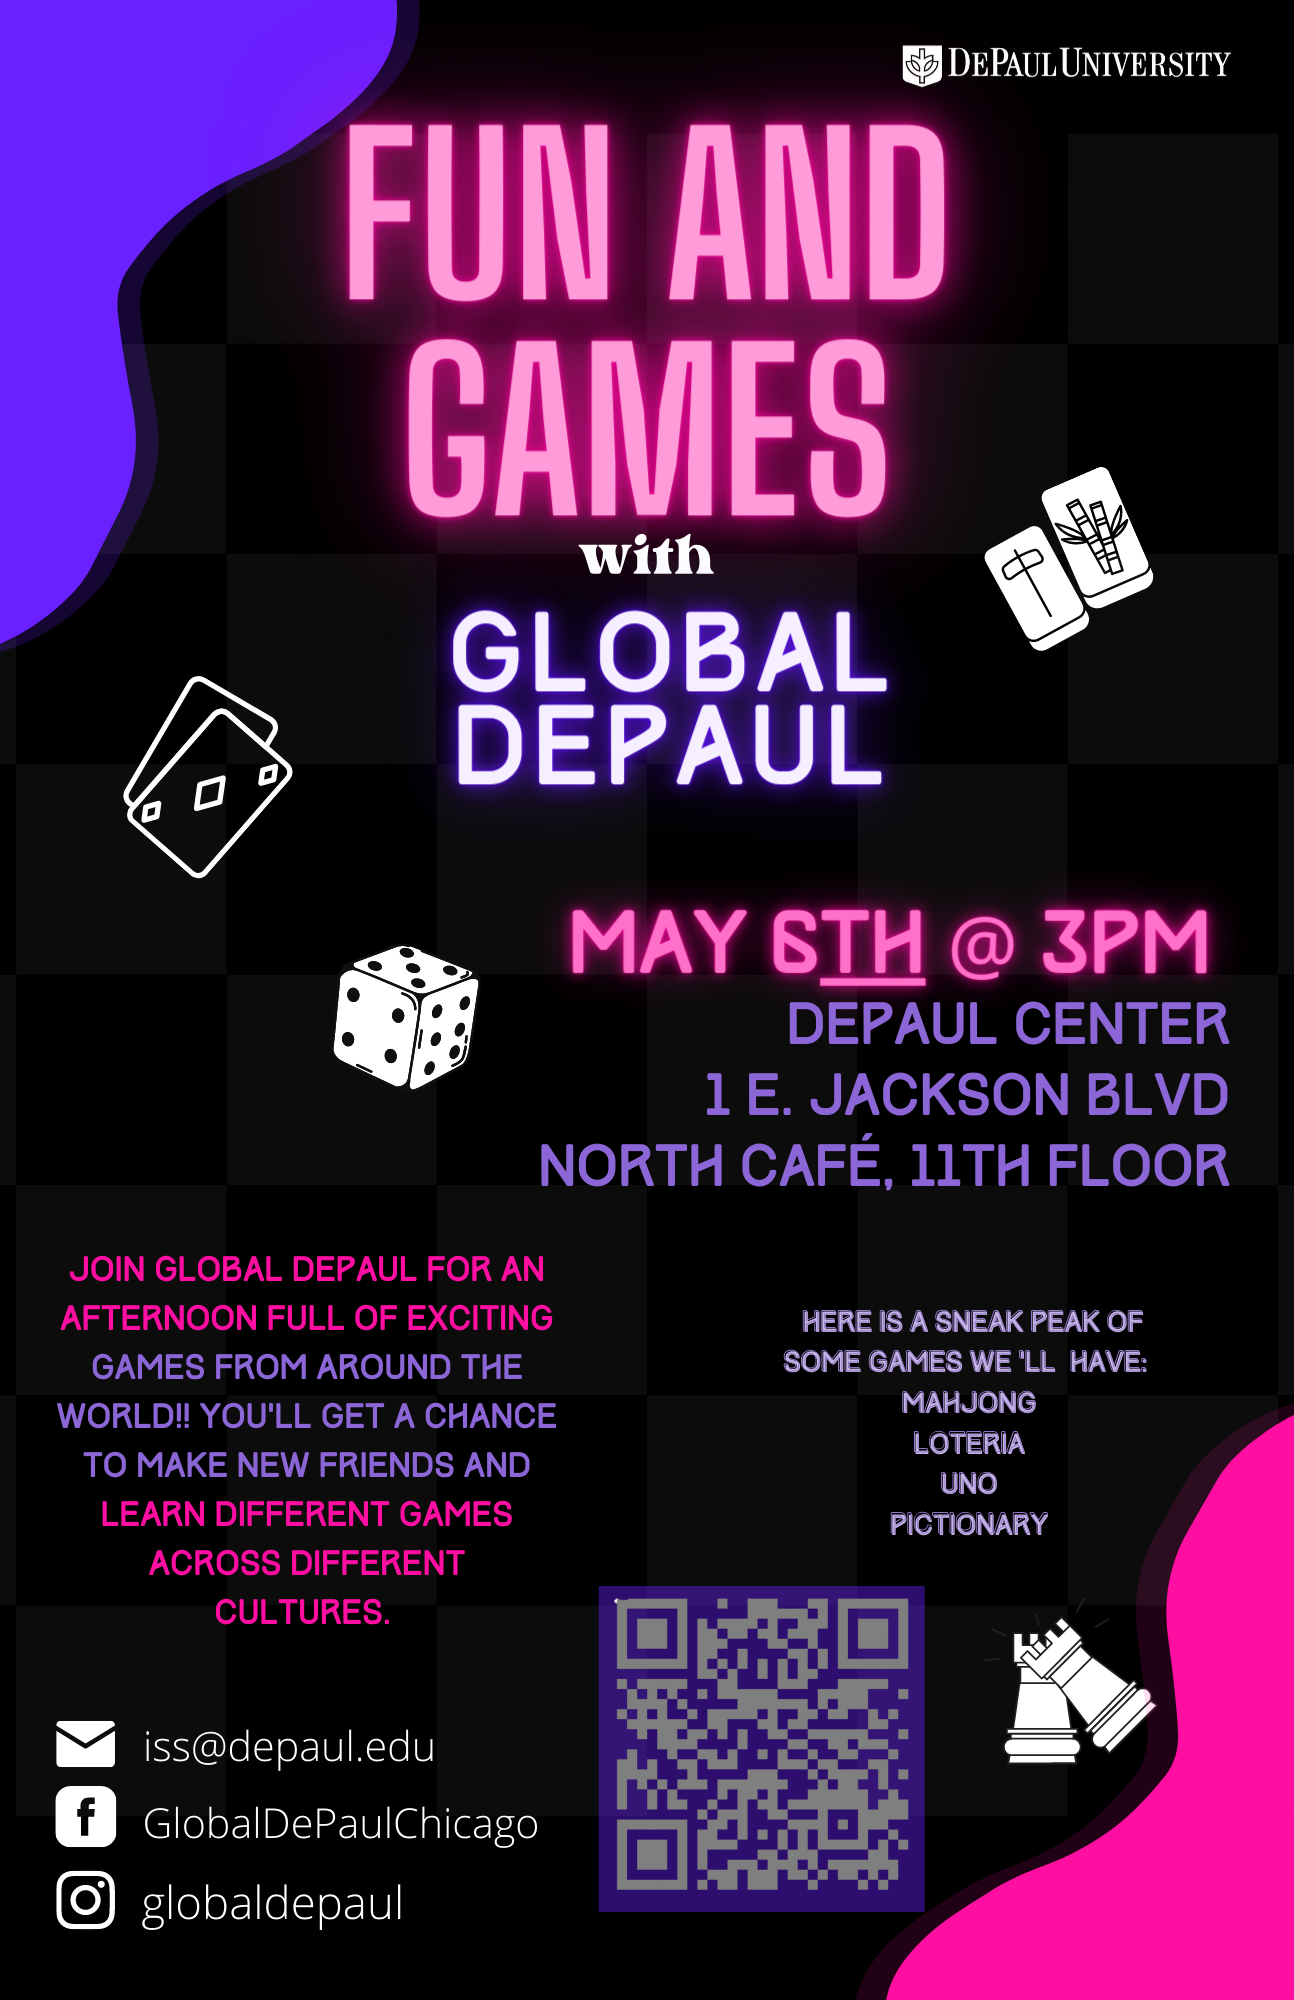 Join us for an afternoon full of games May 6th at 3PM